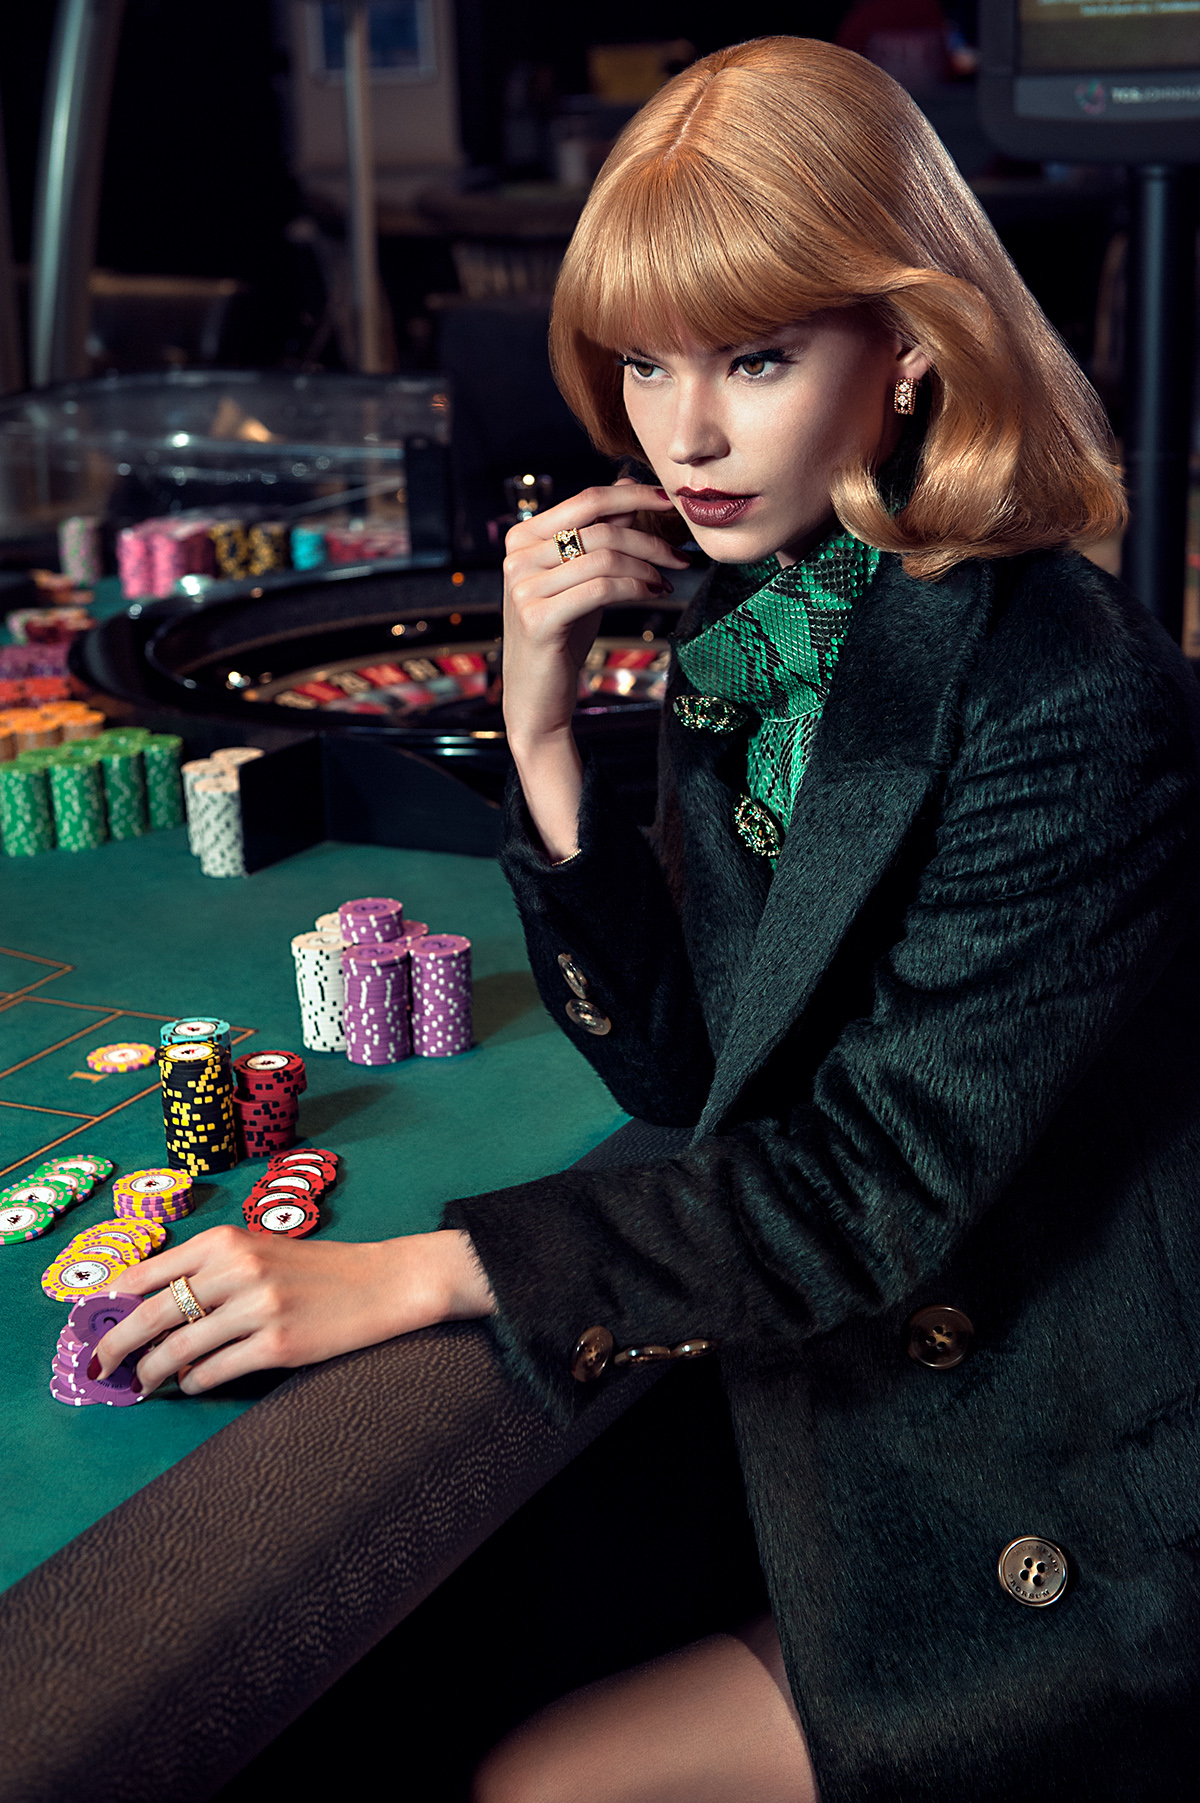 editorial casino 70s glamour Classic Hitchcock beauty model location London